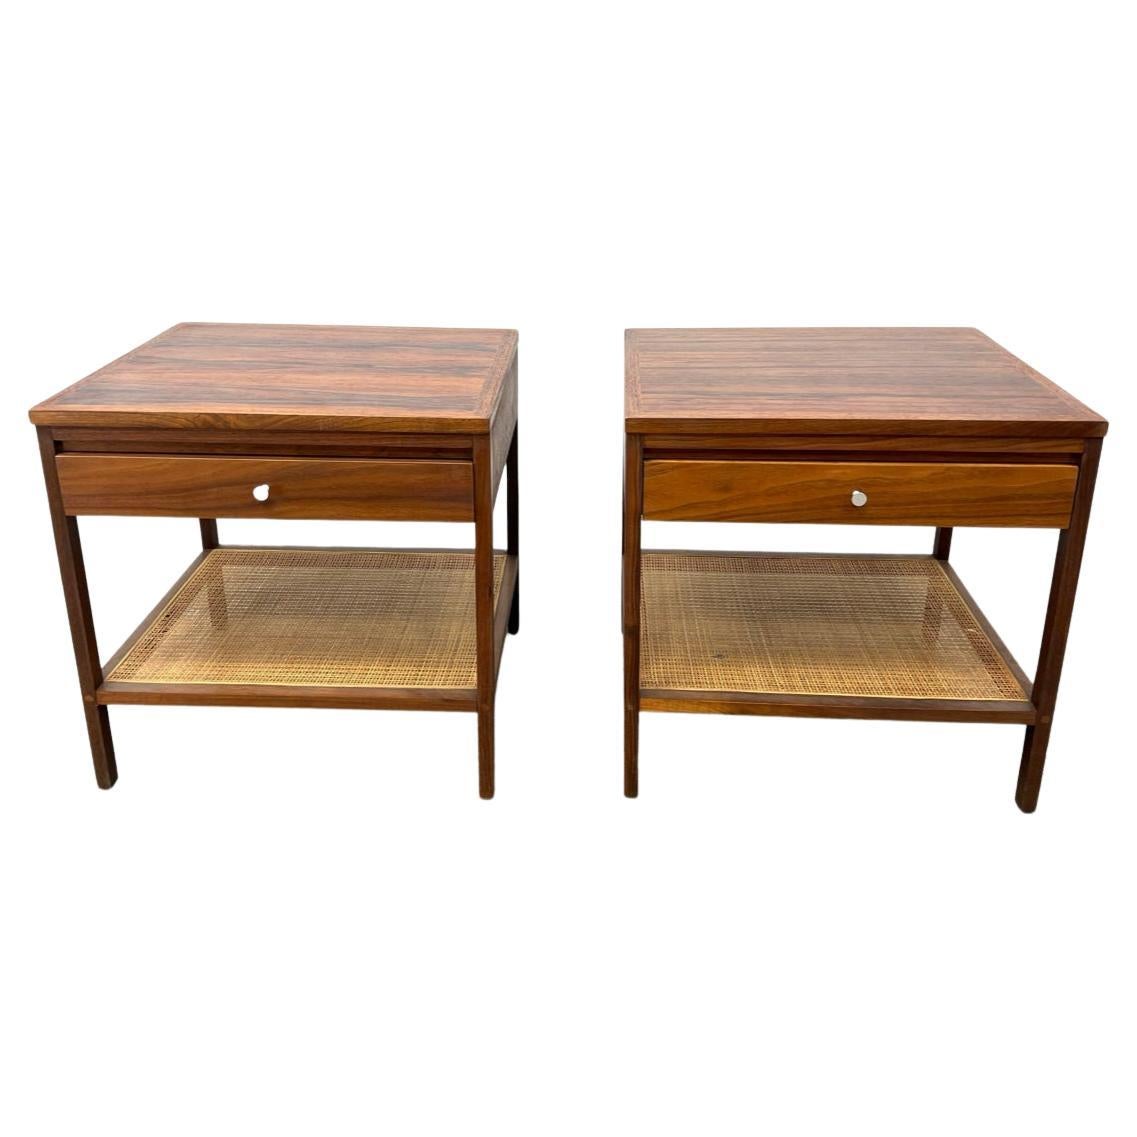 Pair Mid century Paul Mccobb for Lane walnut rosewood and cane nightstands. Designed by Paul Mccobb and manufactured by Lane in Alta Vista VA. Walnut with rosewood sections and solid oak drawer construction with a chrome nickel pull. Has a woven